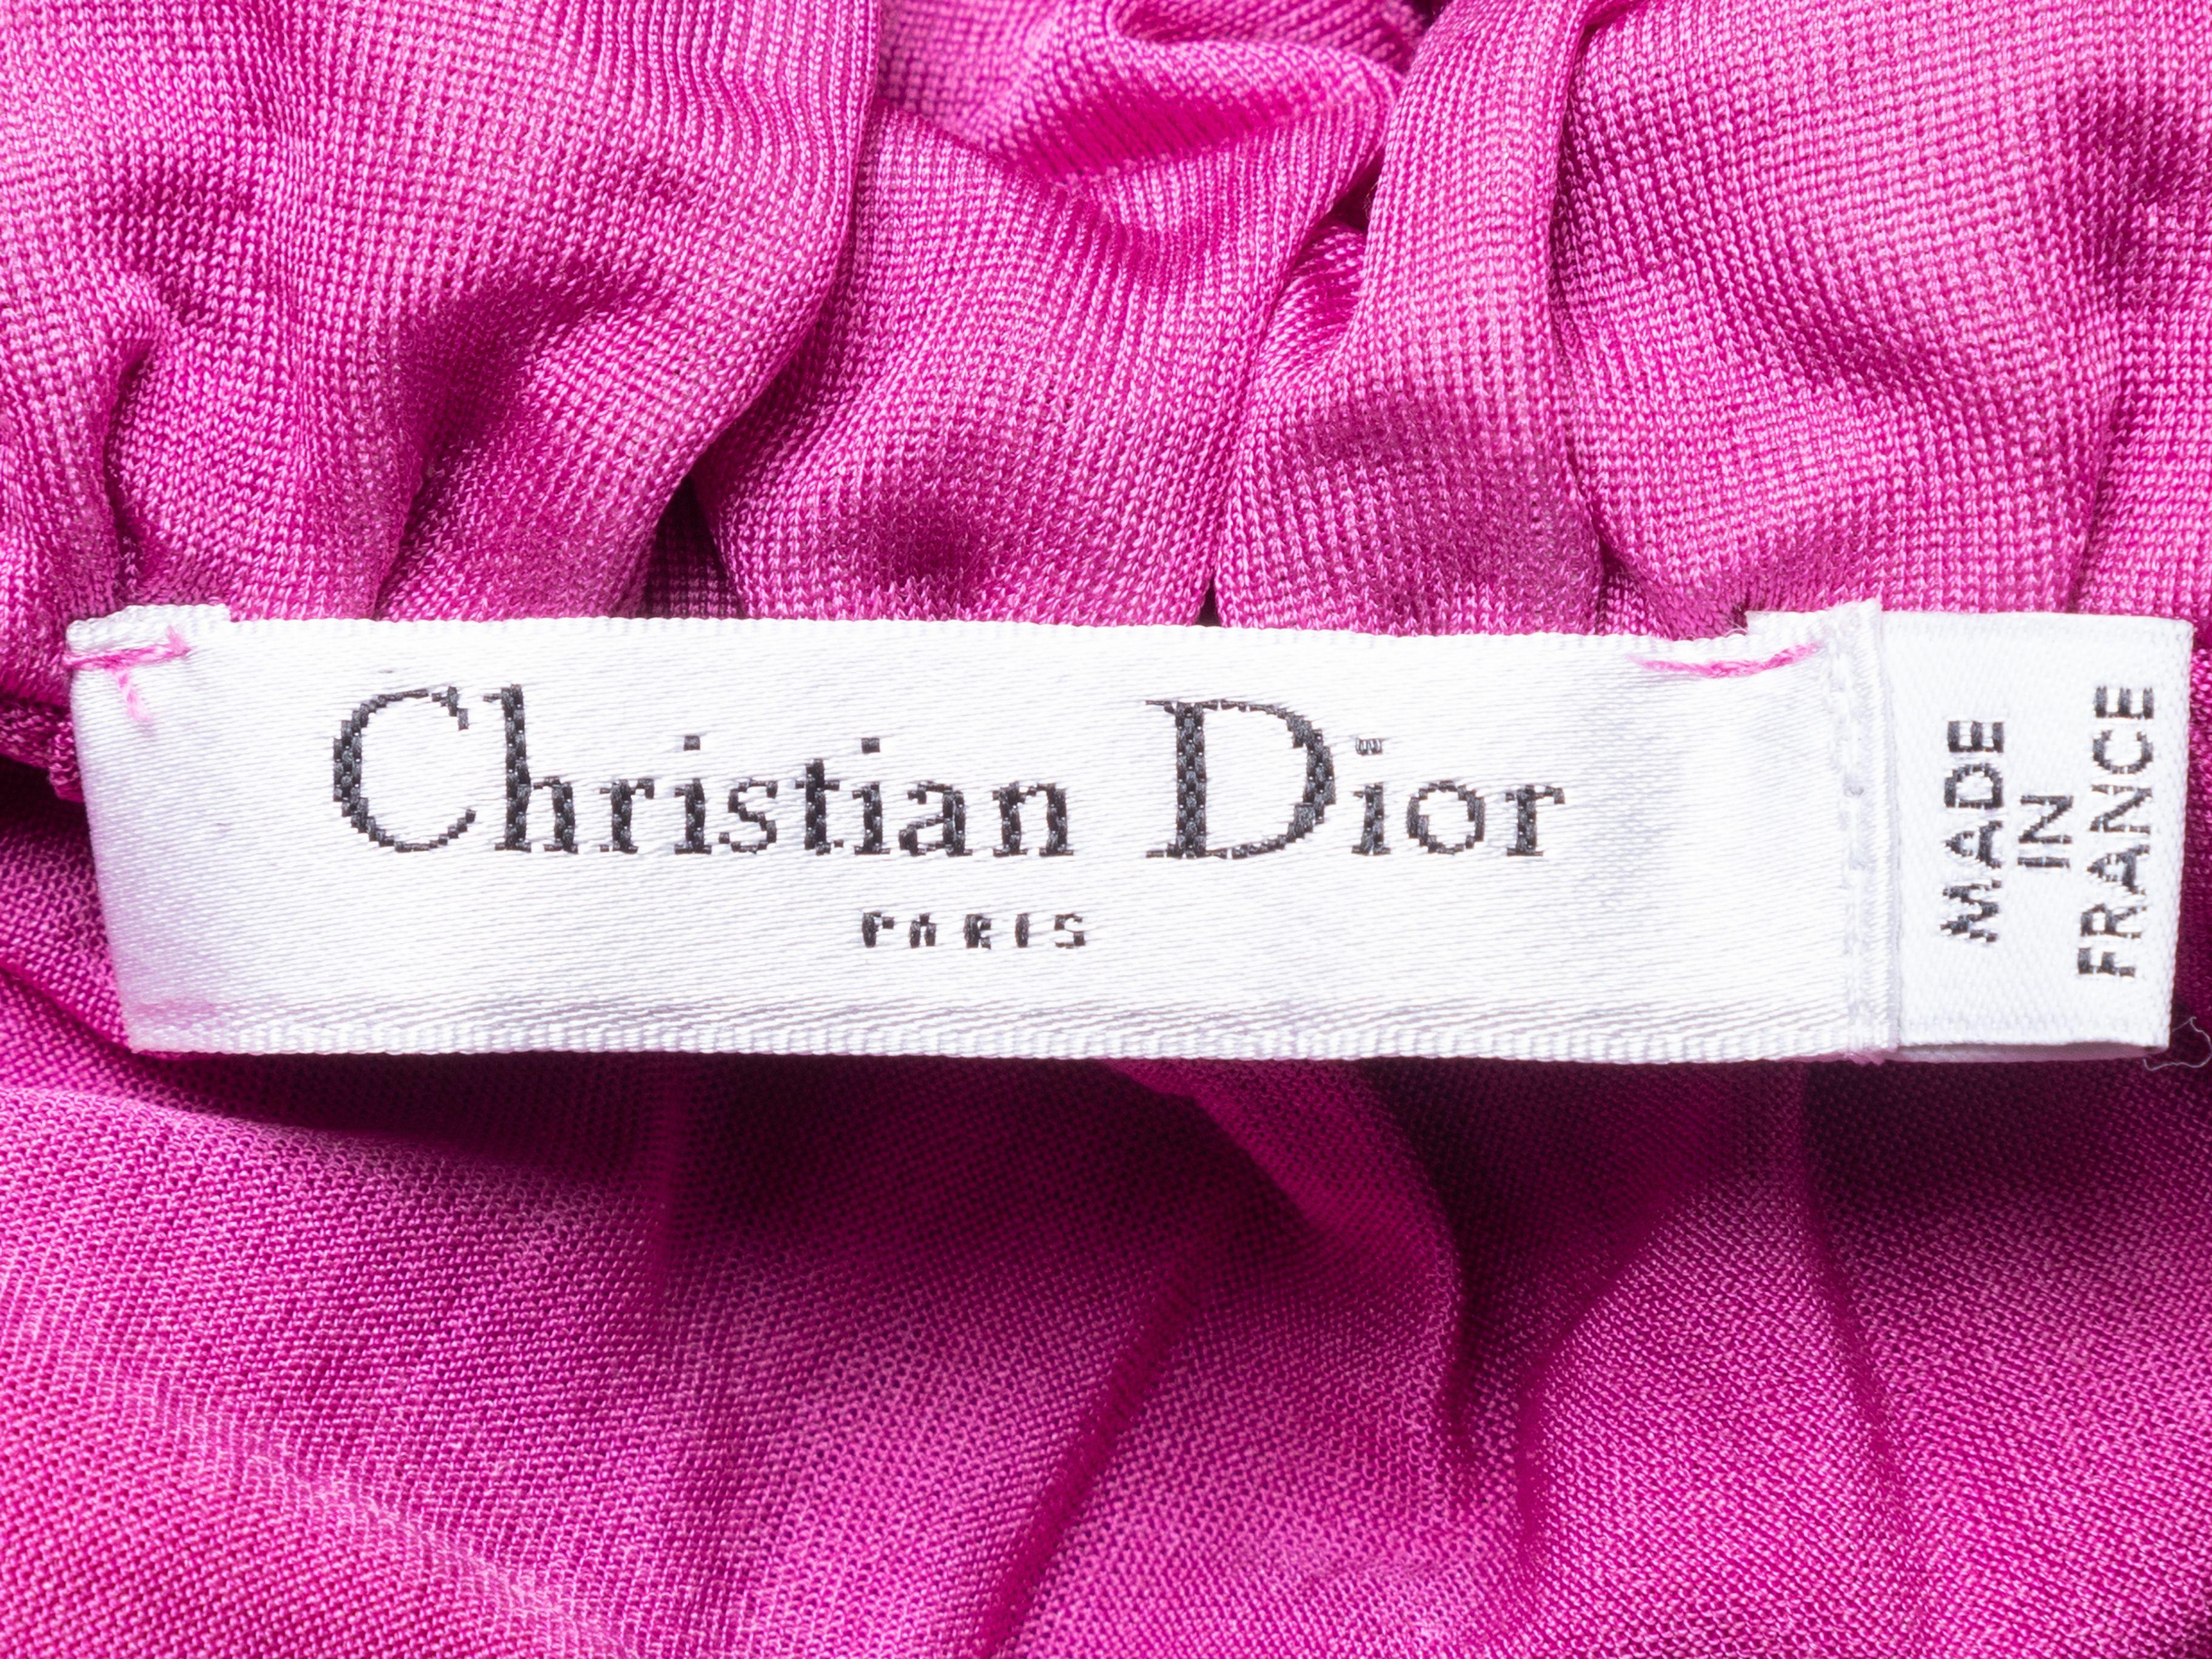 Product Details: Vintage pink cap sleeve top by Christian Dior. Scoop neckline featuring ruffle trim. 30